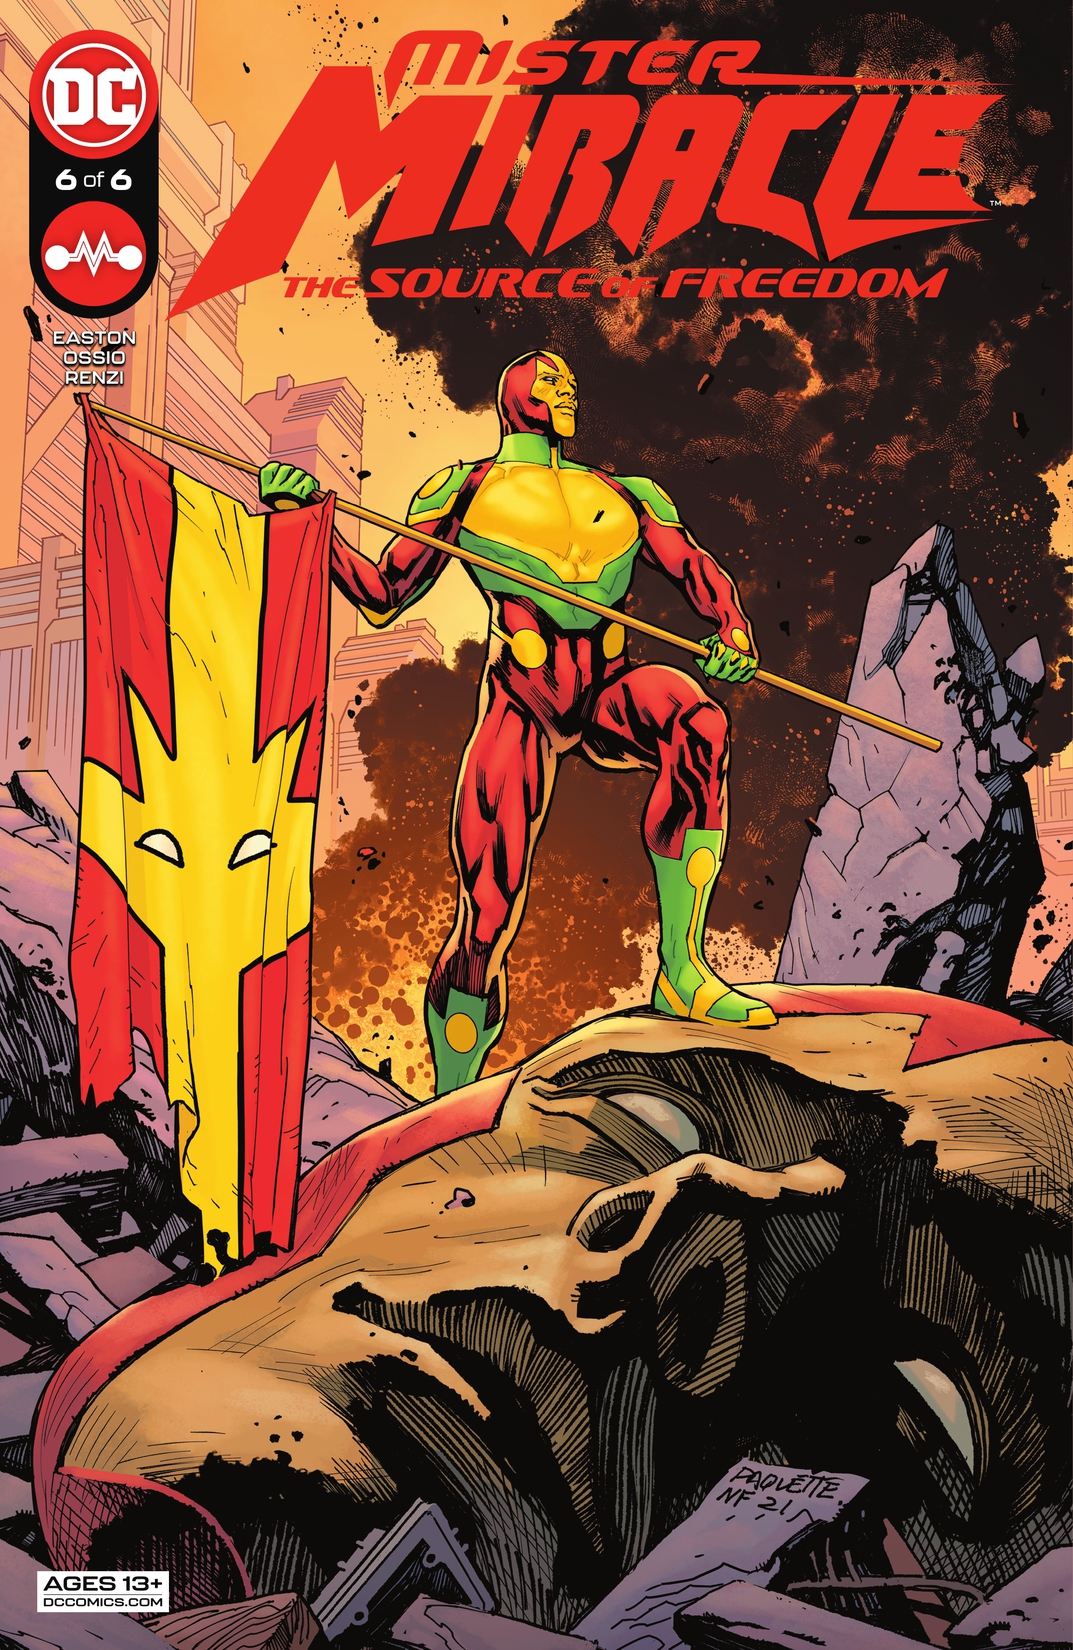 Mister Miracle: The Source of Freedom #6 preview images